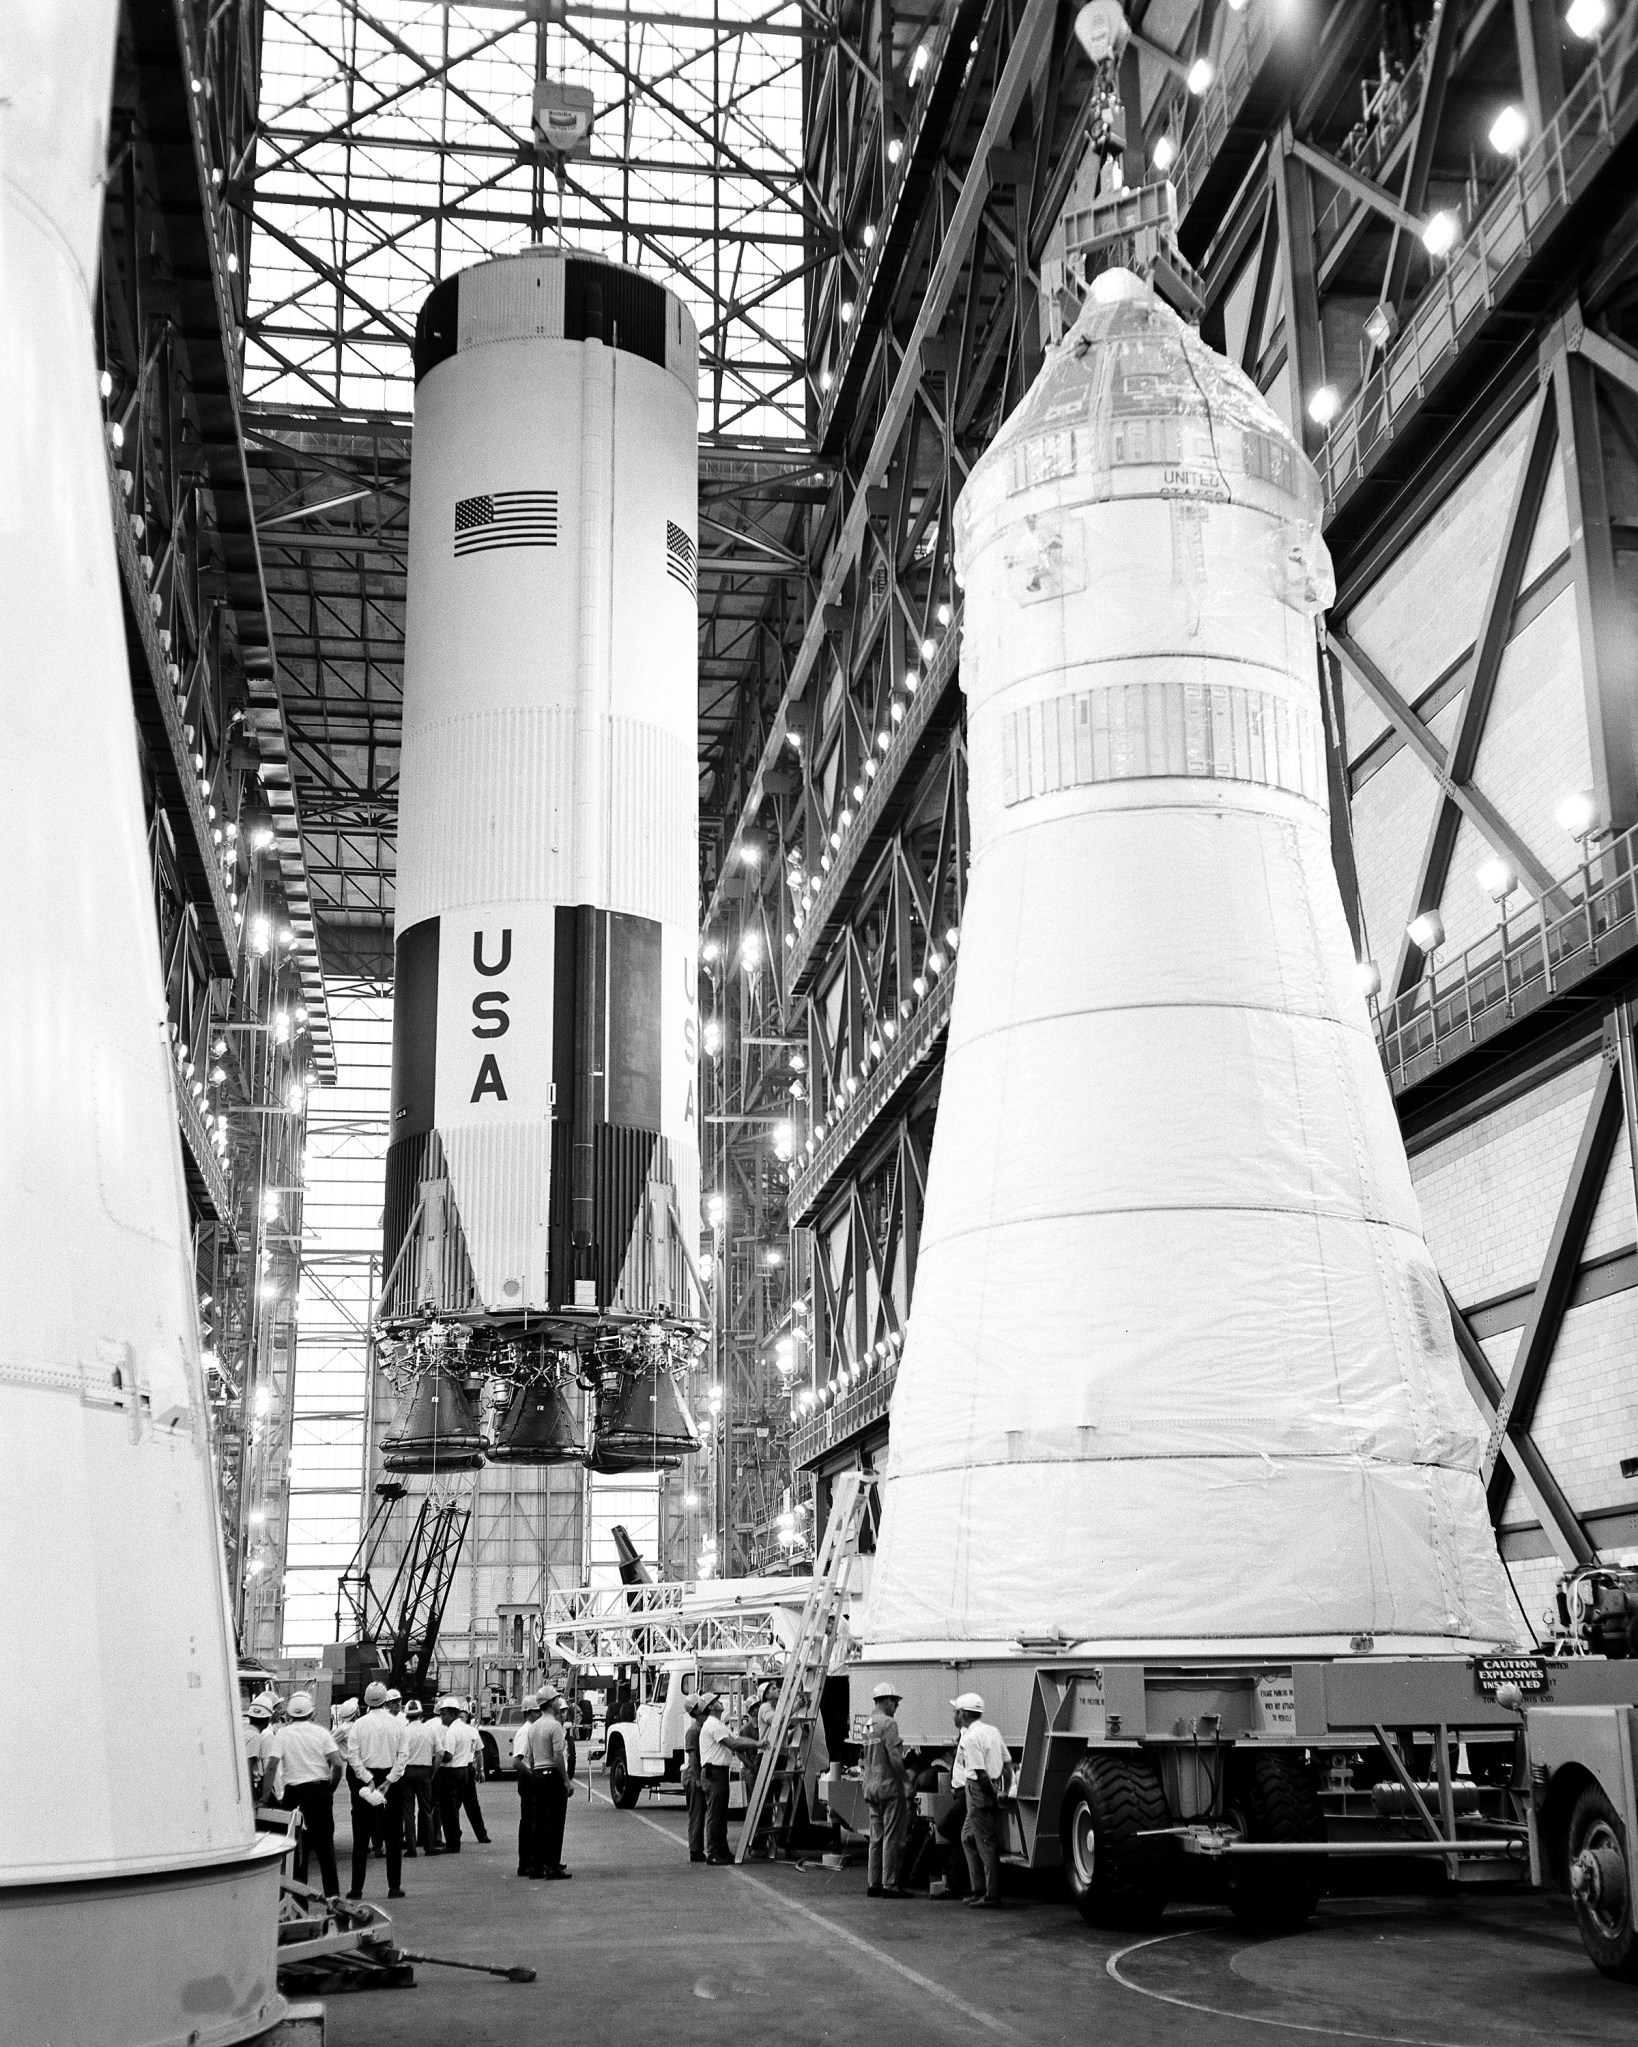 This week in 1969, Apollo 10 launched from NASA’s Kennedy Space Center. 